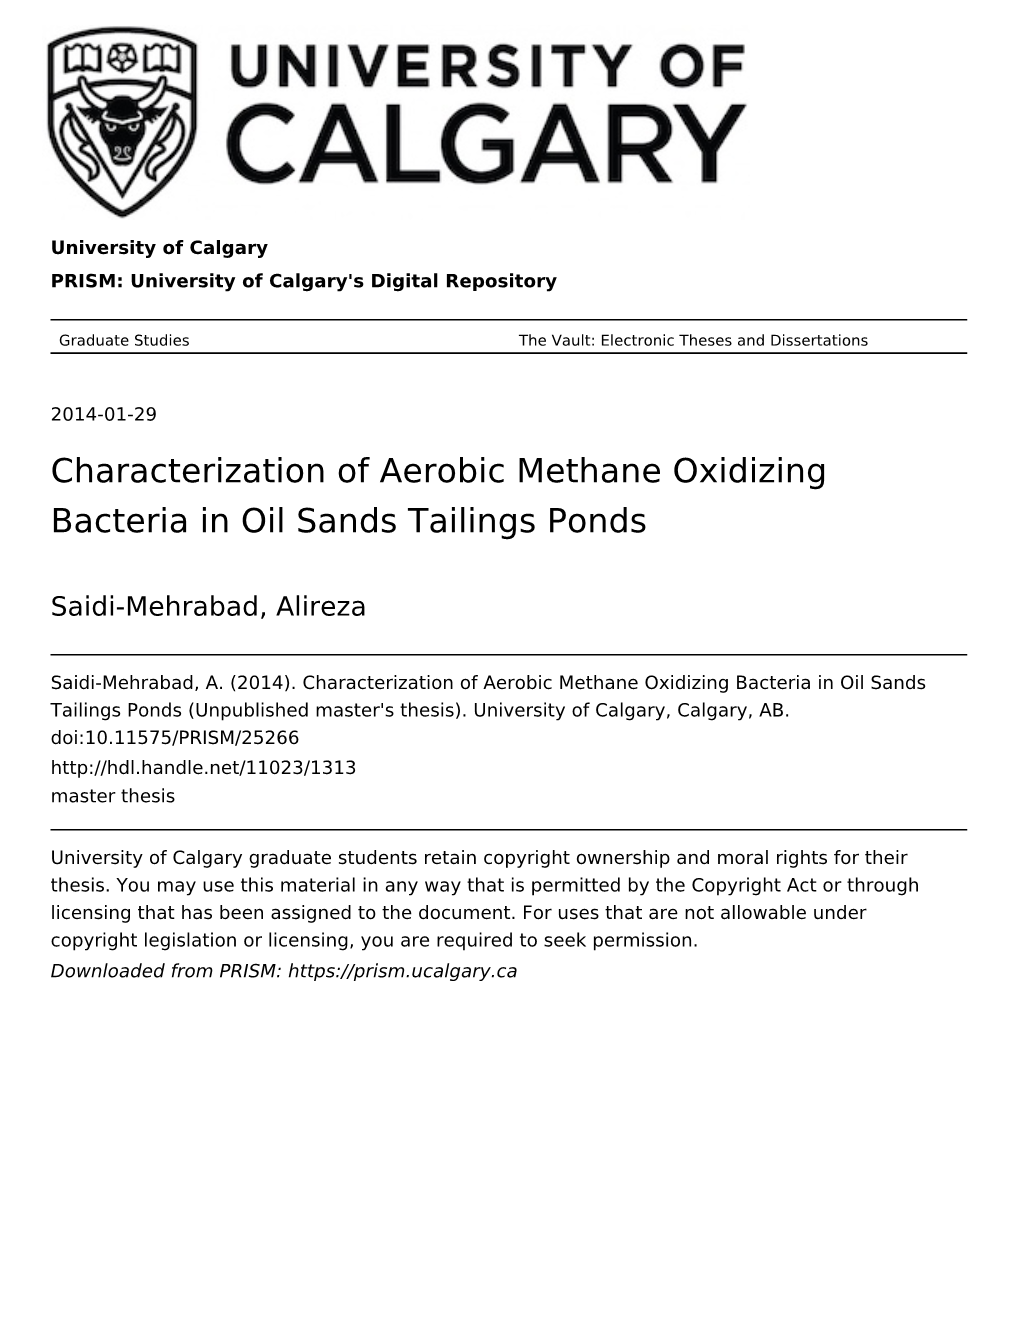 Characterization of Aerobic Methane Oxidizing Bacteria in Oil Sands Tailings Ponds